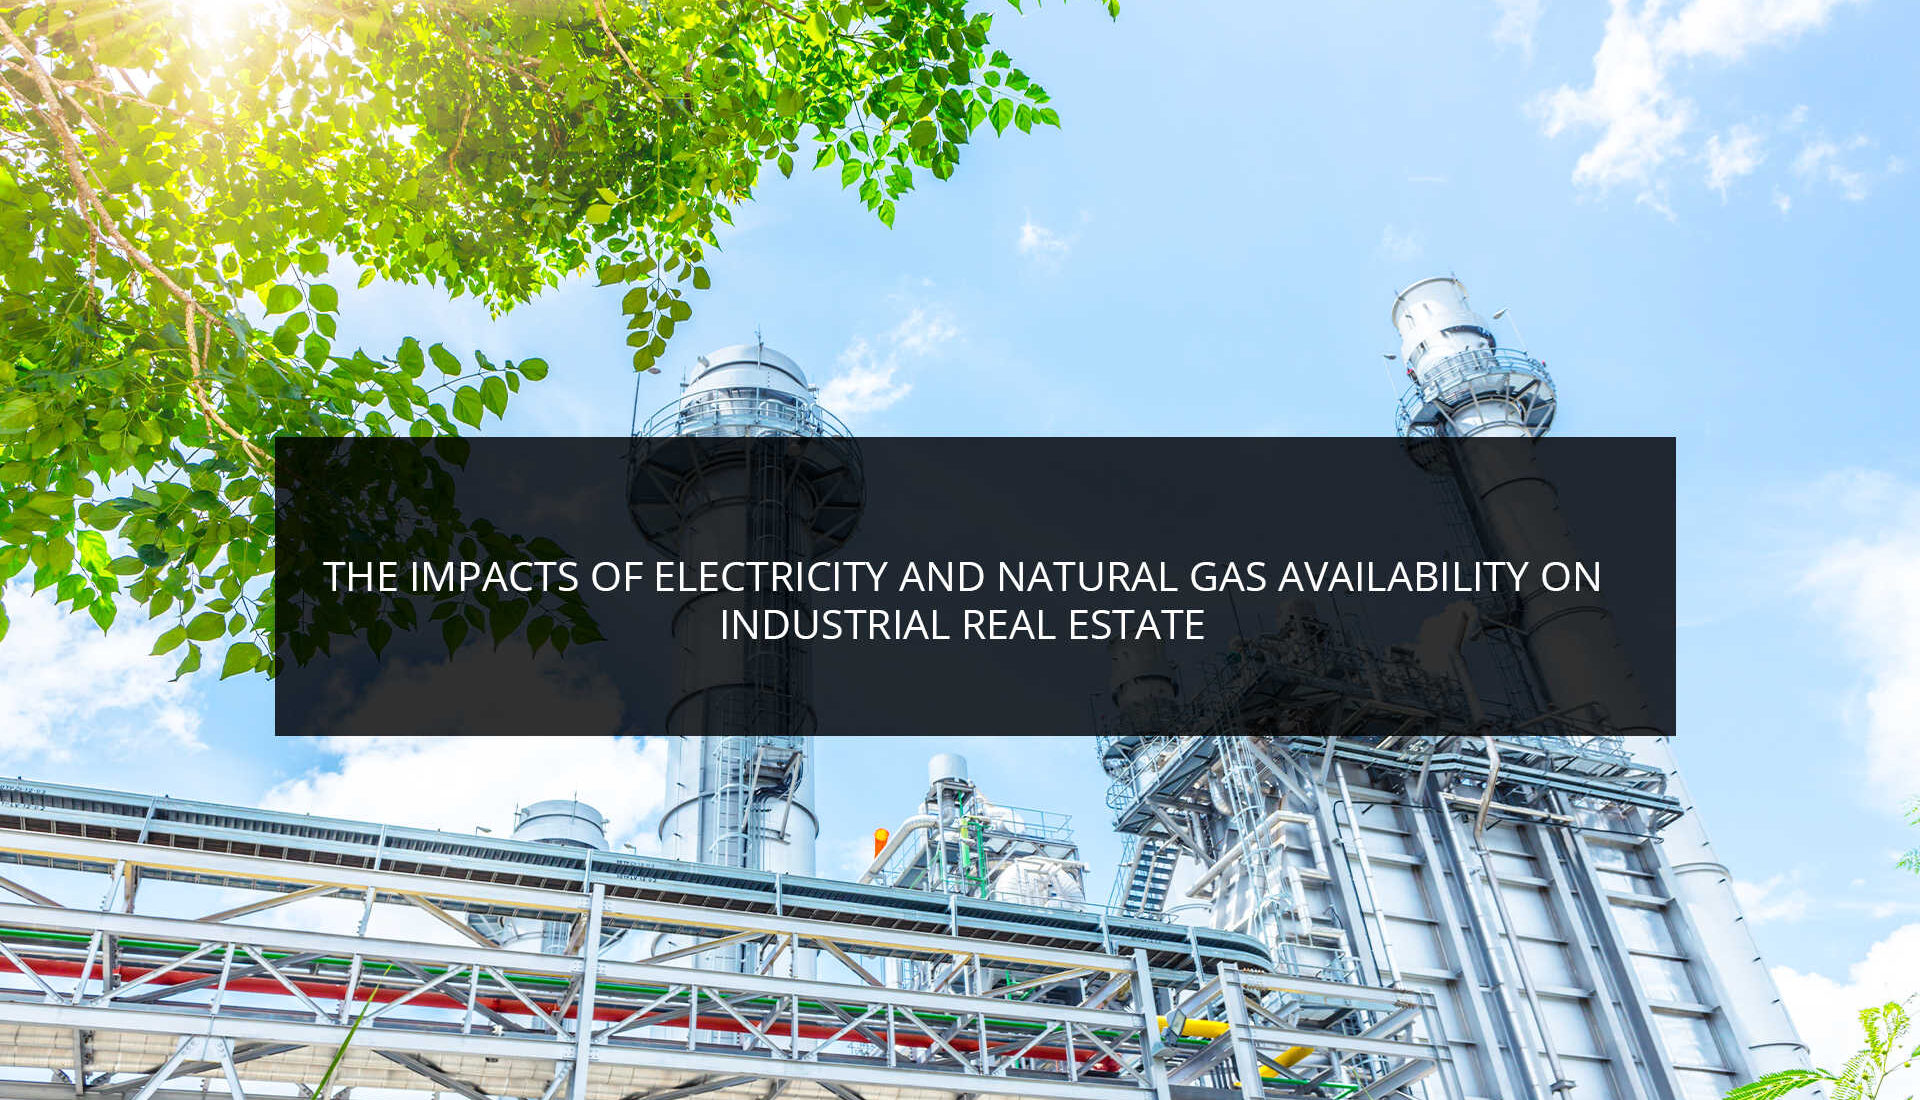 The Impacts of Electricity and Natural Gas Availability on Industrial Real Estate